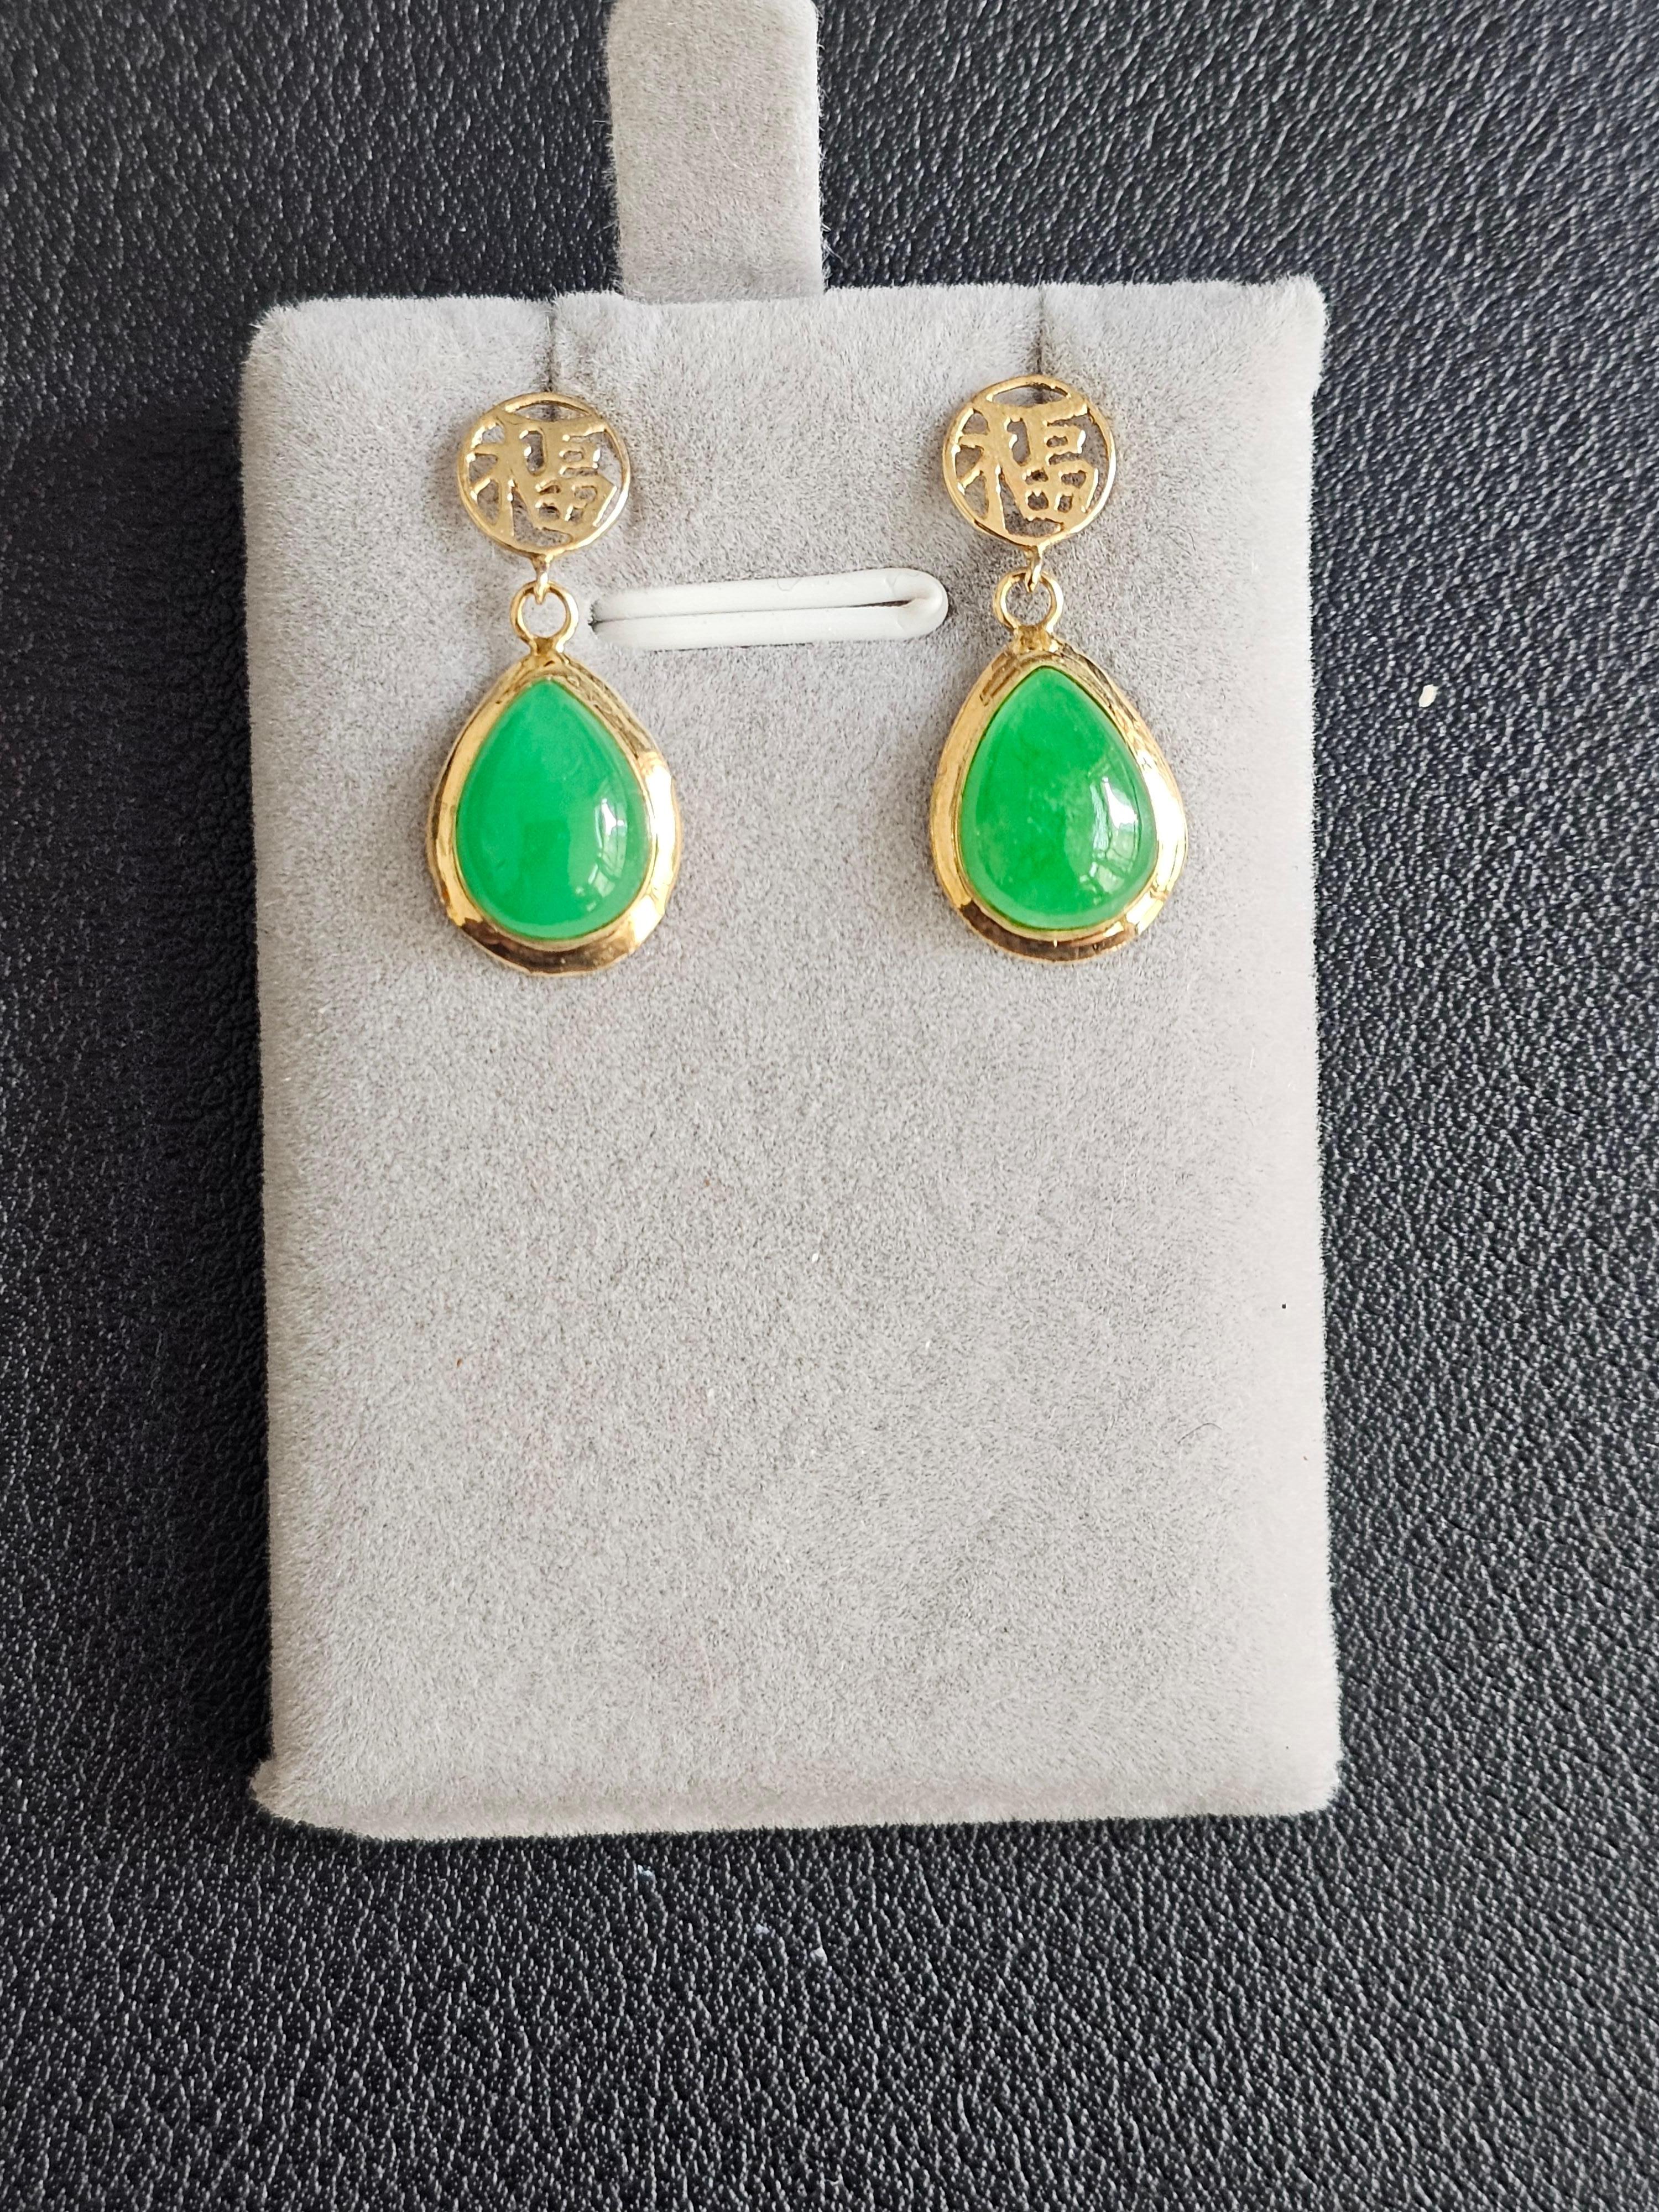 Fortune Drop Green Jade Earrings With 14K Solid Yellow Gold For Sale 2